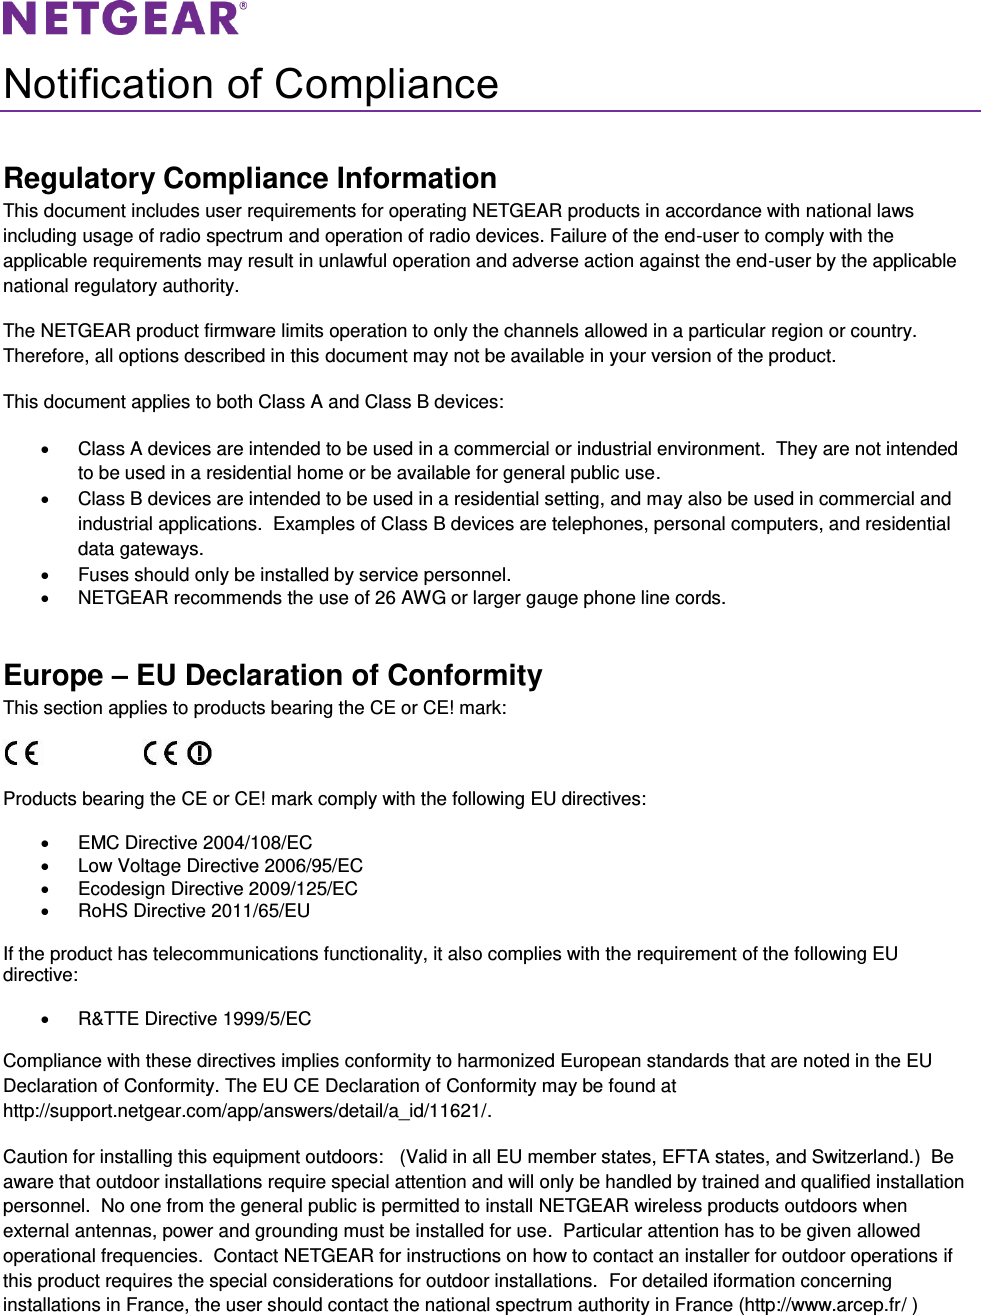   Notification of Compliance Regulatory Compliance Information This document includes user requirements for operating NETGEAR products in accordance with national laws including usage of radio spectrum and operation of radio devices. Failure of the end-user to comply with the applicable requirements may result in unlawful operation and adverse action against the end-user by the applicable national regulatory authority. The NETGEAR product firmware limits operation to only the channels allowed in a particular region or country. Therefore, all options described in this document may not be available in your version of the product. This document applies to both Class A and Class B devices:   Class A devices are intended to be used in a commercial or industrial environment.  They are not intended to be used in a residential home or be available for general public use.   Class B devices are intended to be used in a residential setting, and may also be used in commercial and industrial applications.  Examples of Class B devices are telephones, personal computers, and residential data gateways.   Fuses should only be installed by service personnel.   NETGEAR recommends the use of 26 AWG or larger gauge phone line cords. Europe – EU Declaration of Conformity This section applies to products bearing the CE or CE! mark:                      Products bearing the CE or CE! mark comply with the following EU directives:   EMC Directive 2004/108/EC   Low Voltage Directive 2006/95/EC   Ecodesign Directive 2009/125/EC   RoHS Directive 2011/65/EU If the product has telecommunications functionality, it also complies with the requirement of the following EU directive:   R&amp;TTE Directive 1999/5/EC Compliance with these directives implies conformity to harmonized European standards that are noted in the EU Declaration of Conformity. The EU CE Declaration of Conformity may be found at http://support.netgear.com/app/answers/detail/a_id/11621/. Caution for installing this equipment outdoors:   (Valid in all EU member states, EFTA states, and Switzerland.)  Be aware that outdoor installations require special attention and will only be handled by trained and qualified installation personnel.  No one from the general public is permitted to install NETGEAR wireless products outdoors when external antennas, power and grounding must be installed for use.  Particular attention has to be given allowed operational frequencies.  Contact NETGEAR for instructions on how to contact an installer for outdoor operations if this product requires the special considerations for outdoor installations.  For detailed iformation concerning installations in France, the user should contact the national spectrum authority in France (http://www.arcep.fr/ ) 